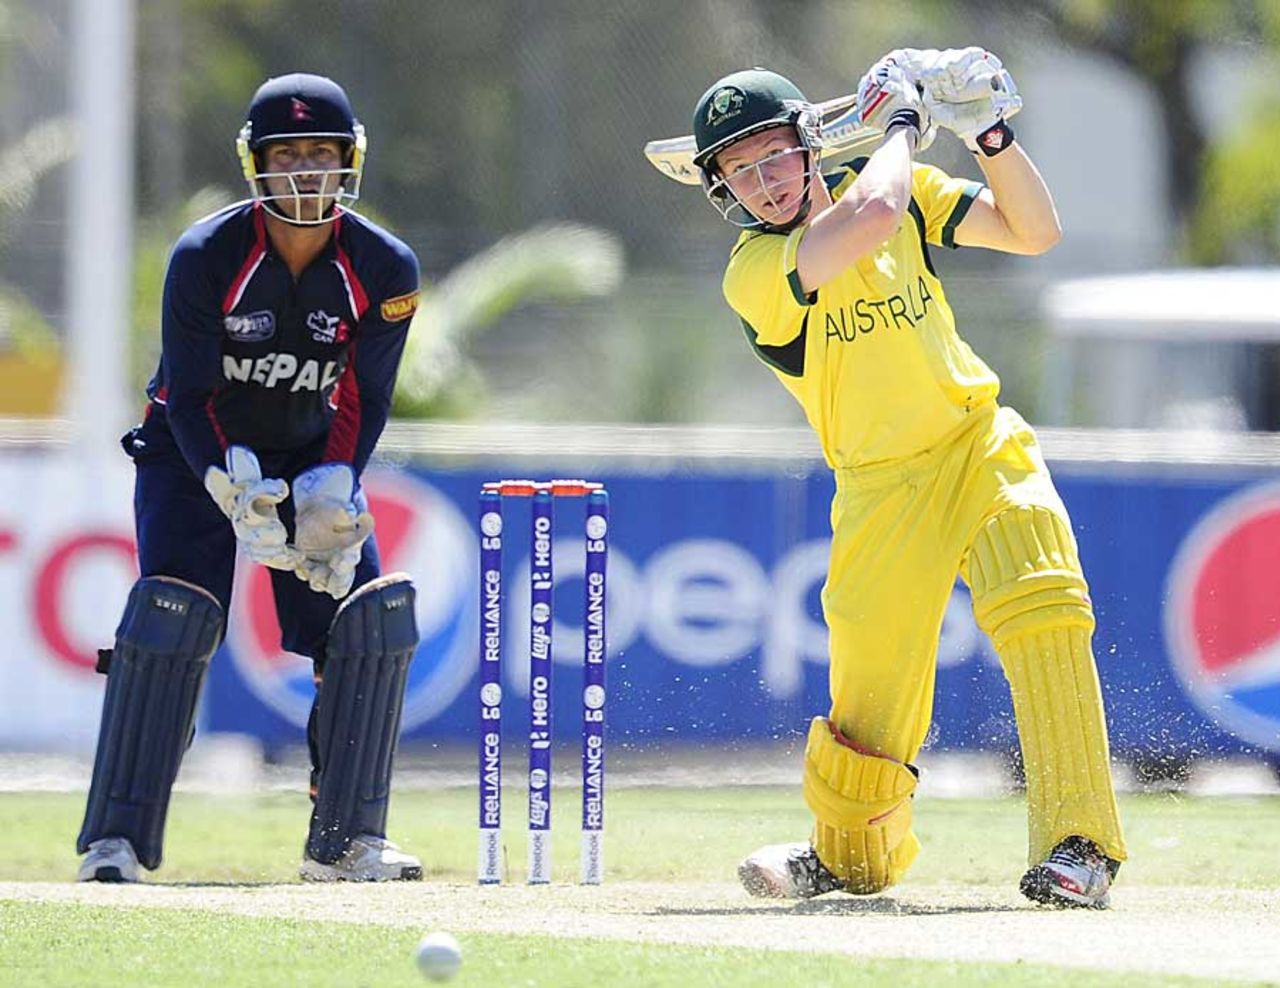 Cameron Bancroft hits one through the off side, Australia v Nepal, Group A, ICC Under-19 World Cup 2012, Townsville, August 13, 2012